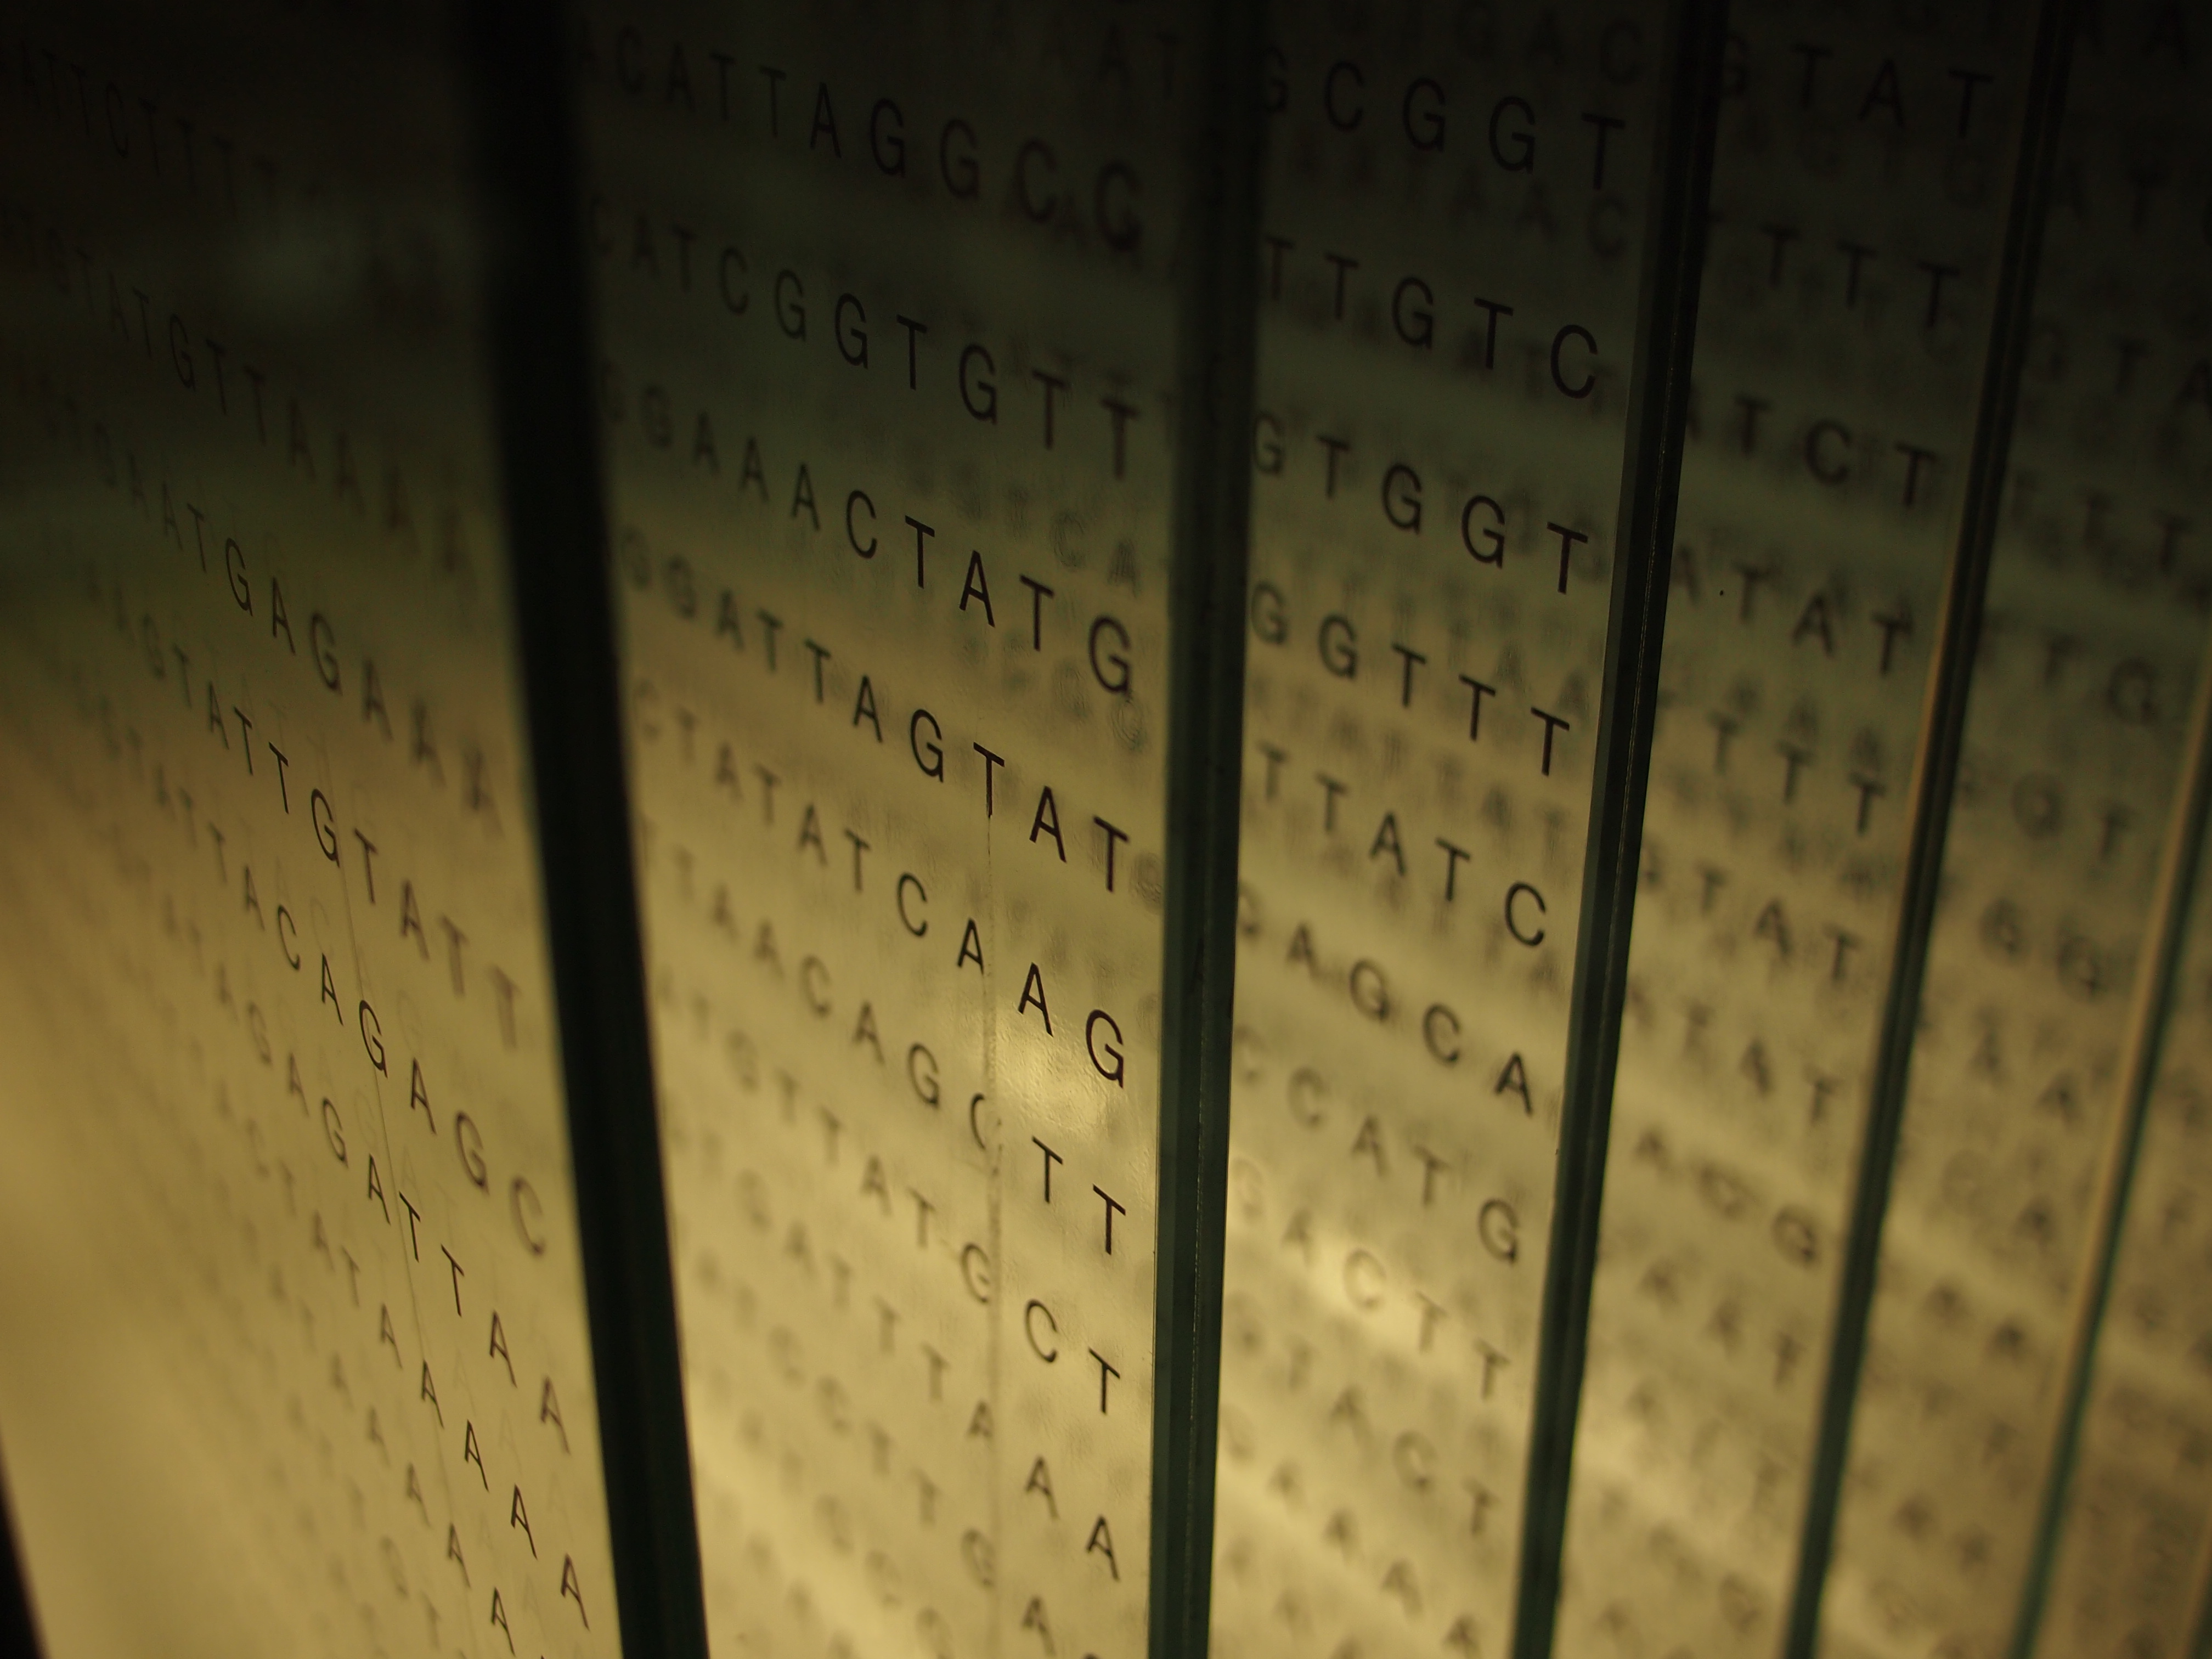 Four transparent panels displaying letters "ATCG (representing DNA bases).